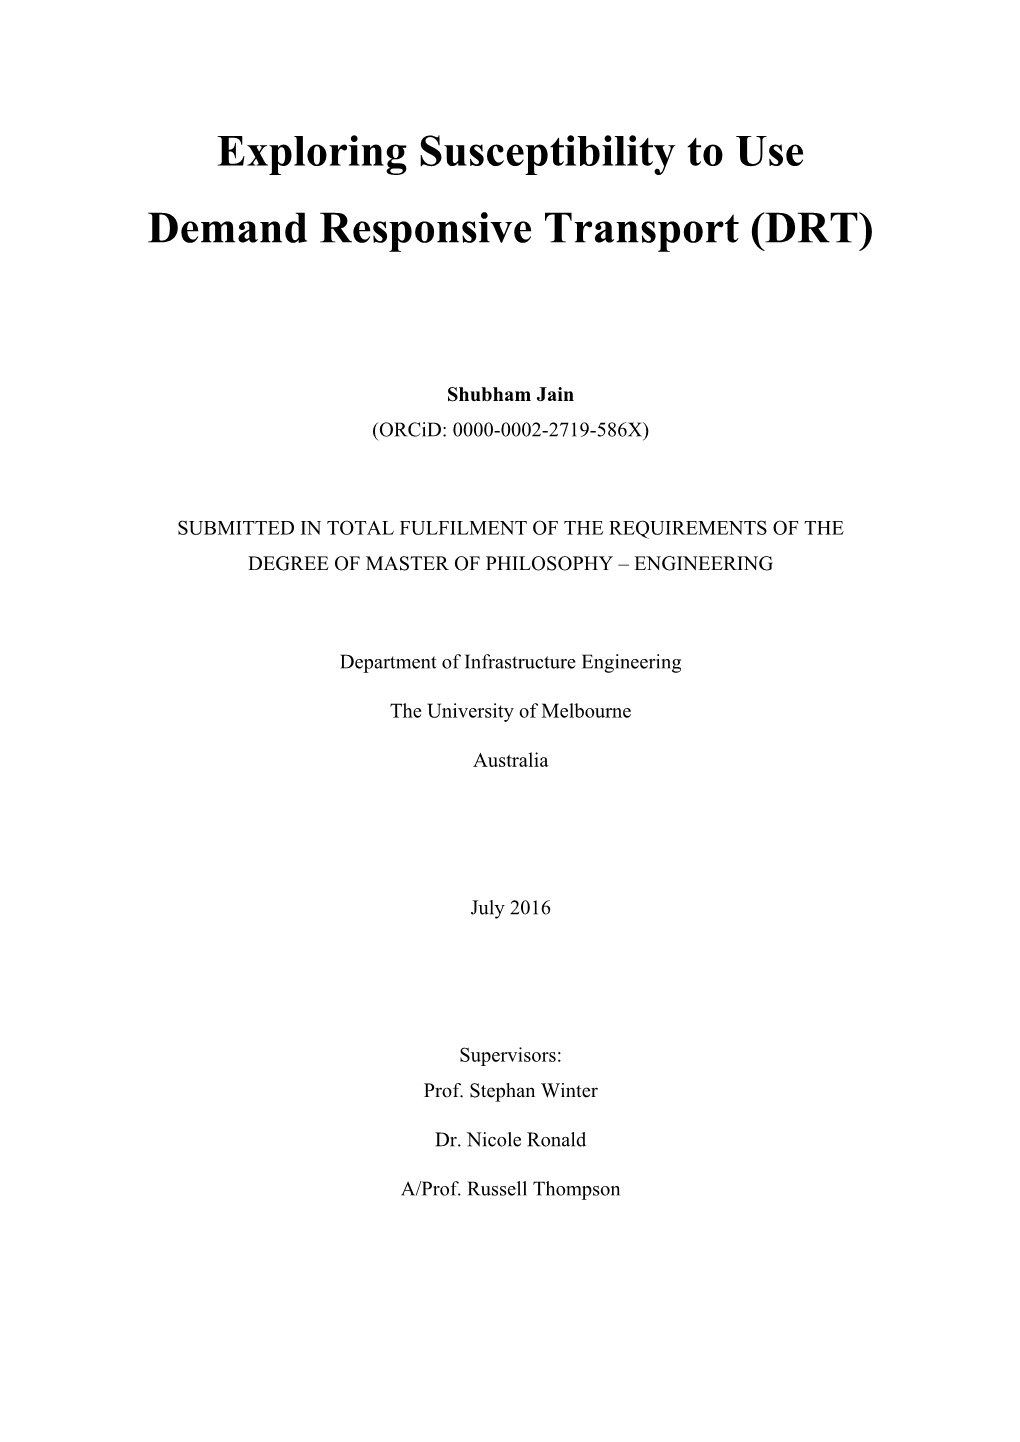 Exploring Susceptibility to Use Demand Responsive Transport (DRT)